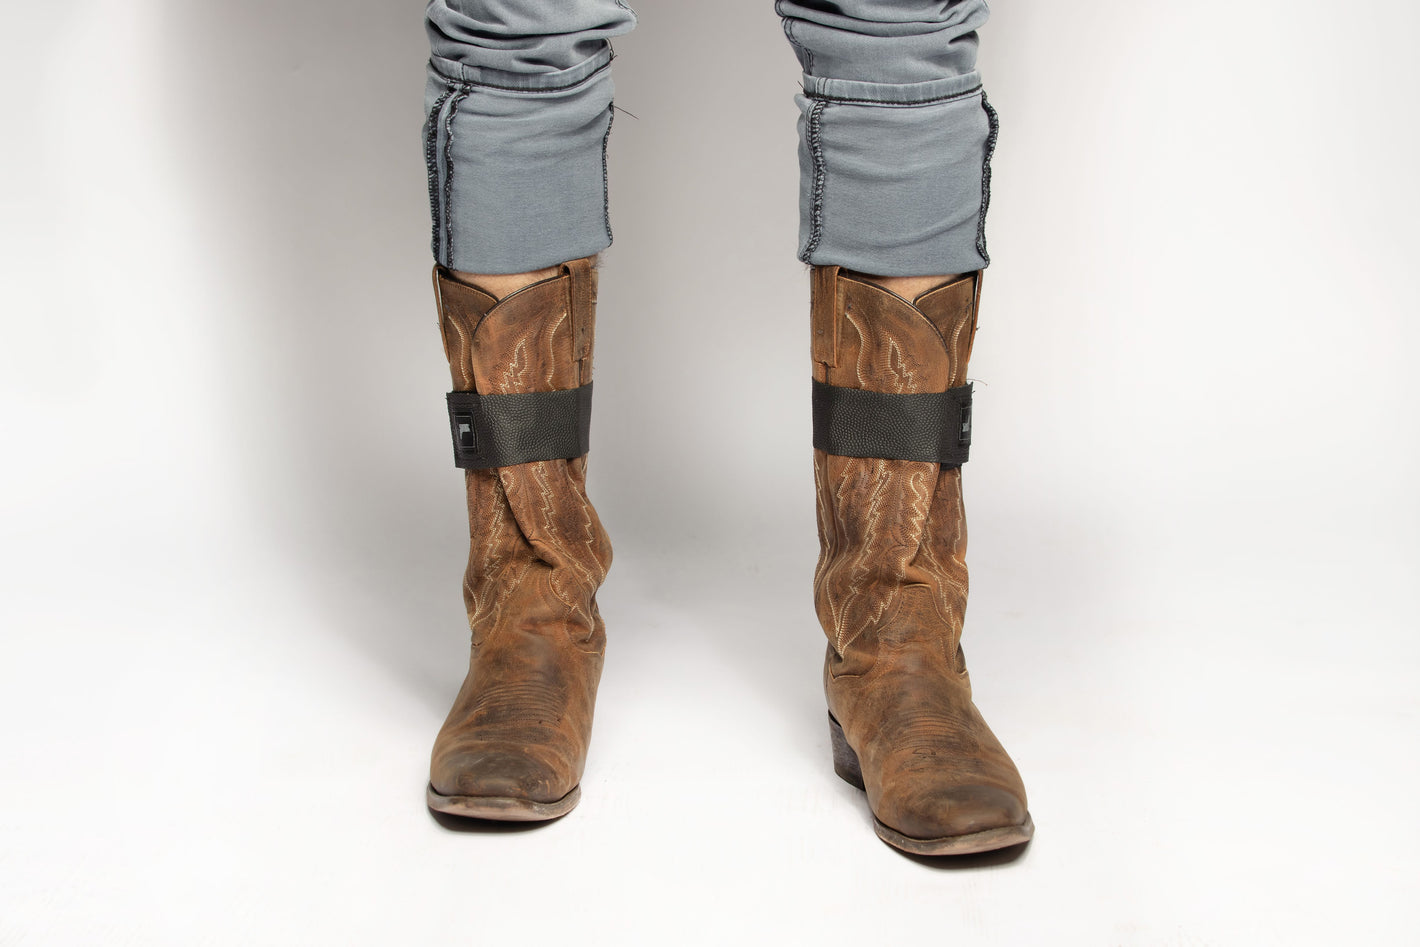 The Boot Girdle is a compression strap for the shaft of cowboy boots